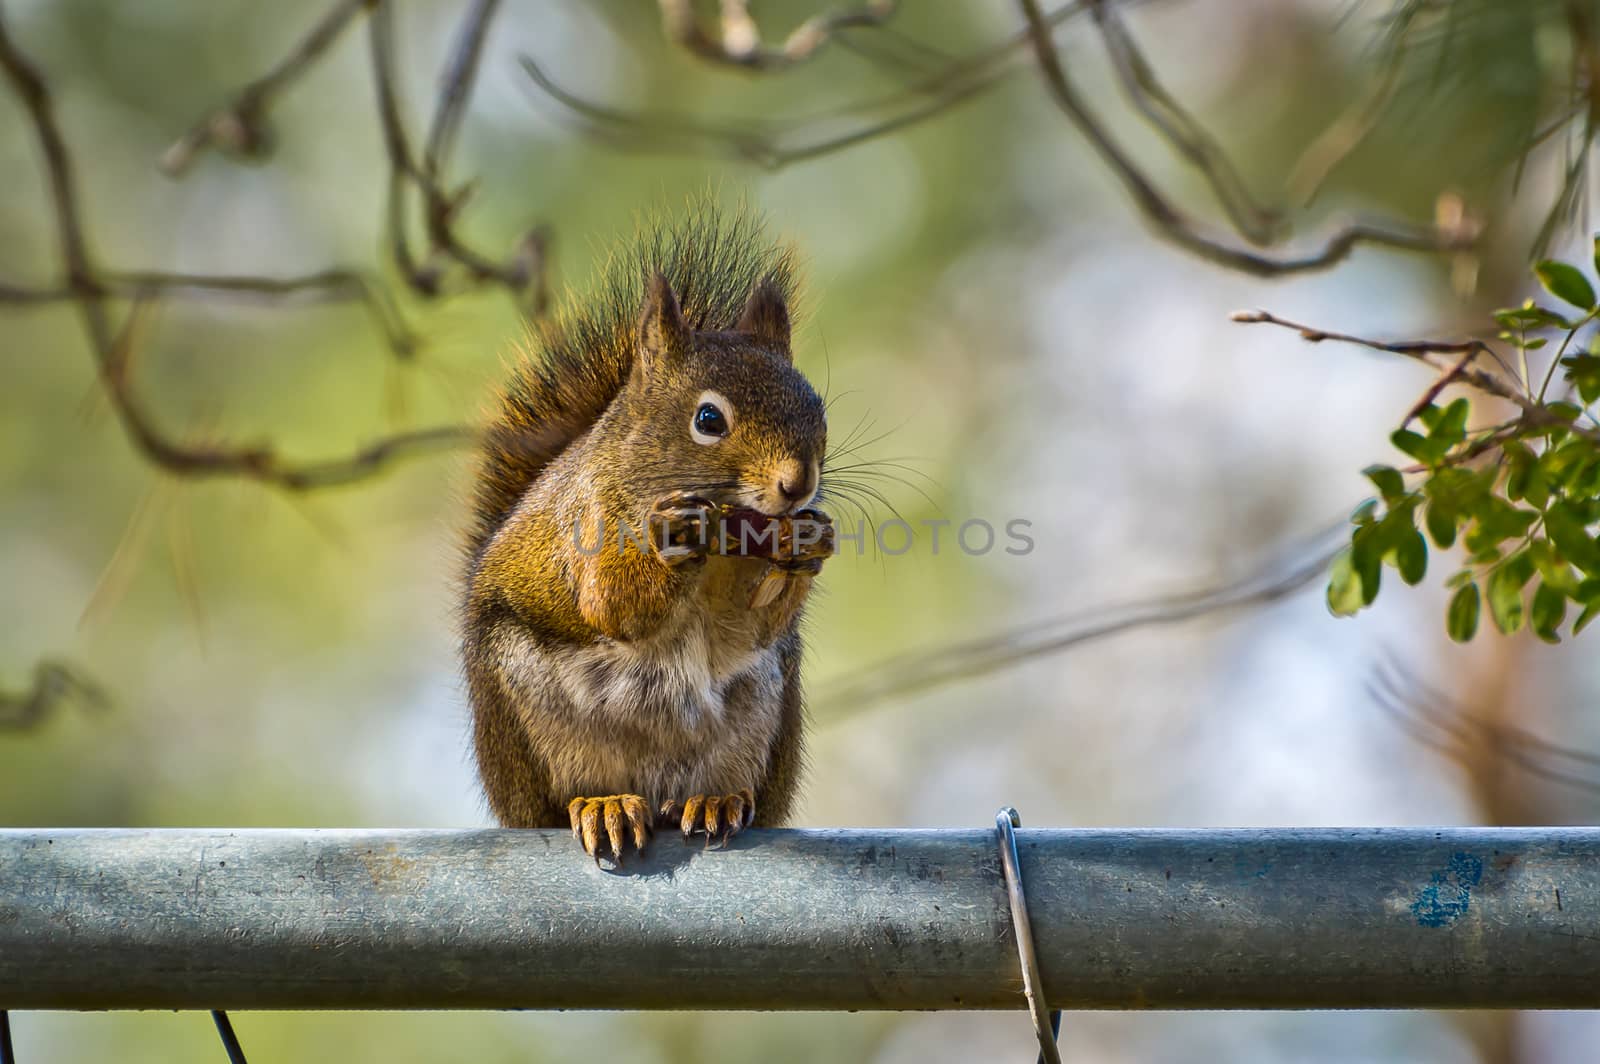 Squirrel eating on a fence, clutching it's treasure in its claws.